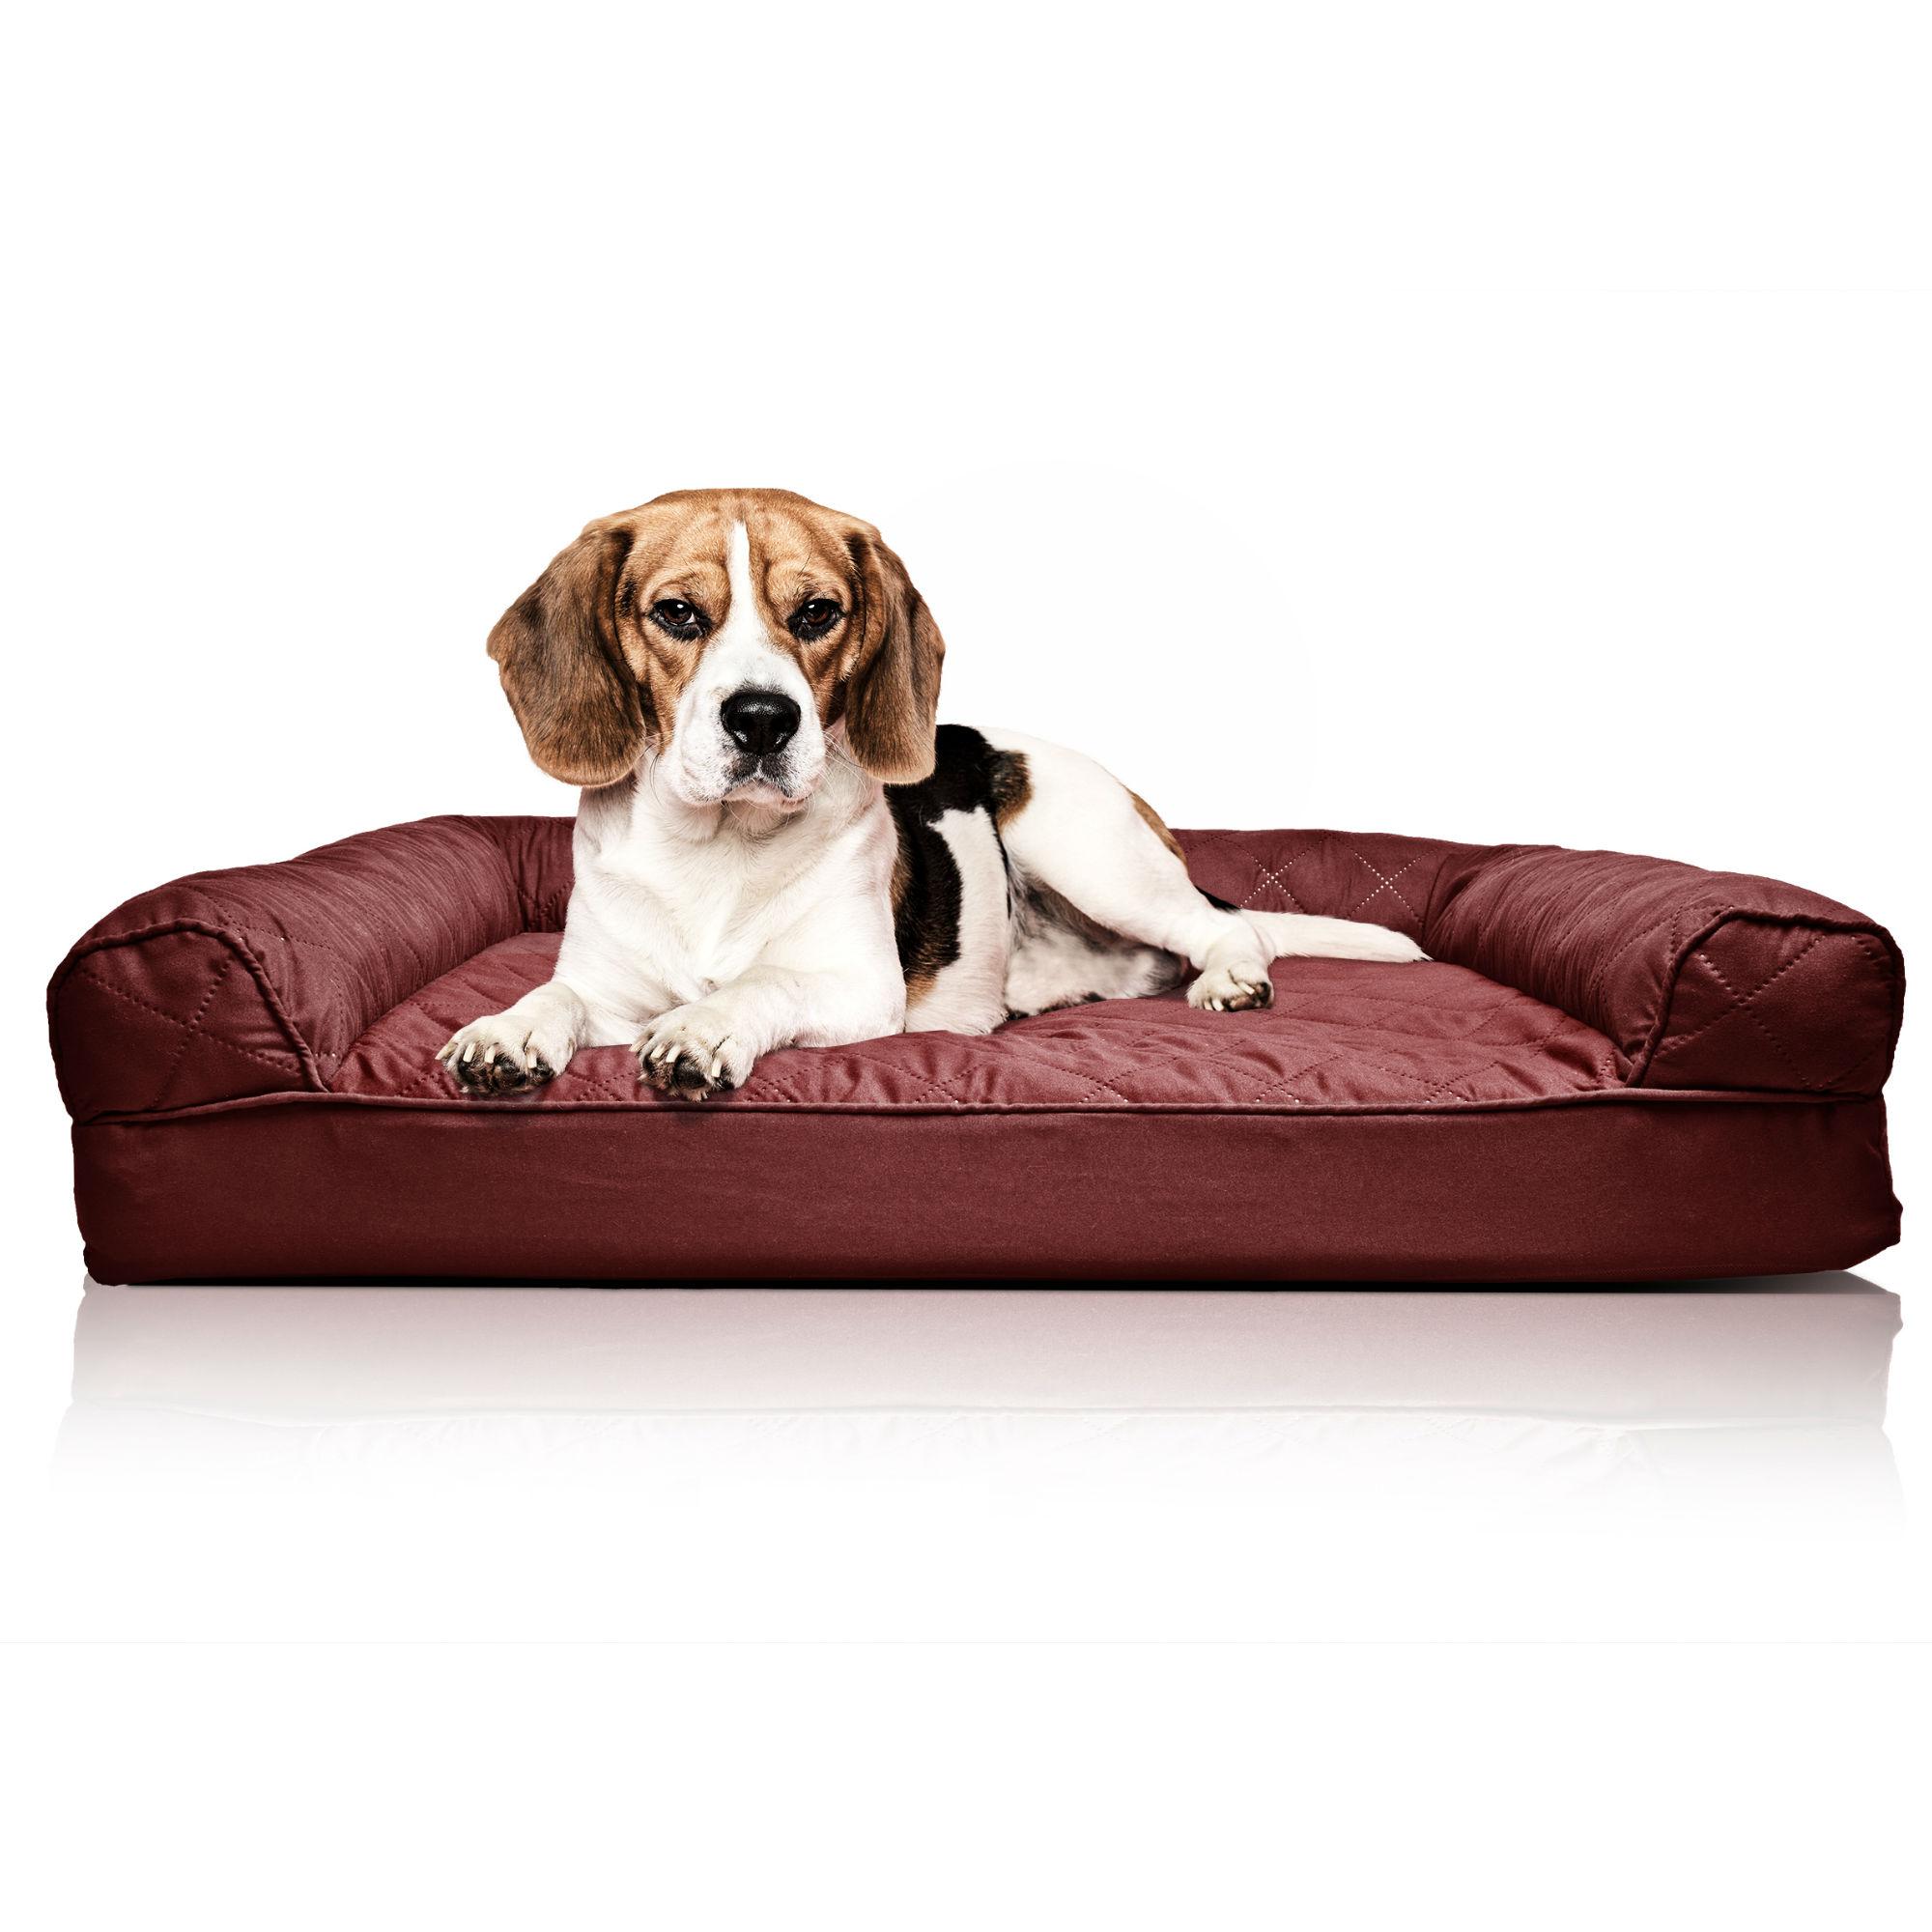 Furhaven Quilted Orthopedic Sofa Pet Bed - Wine Red